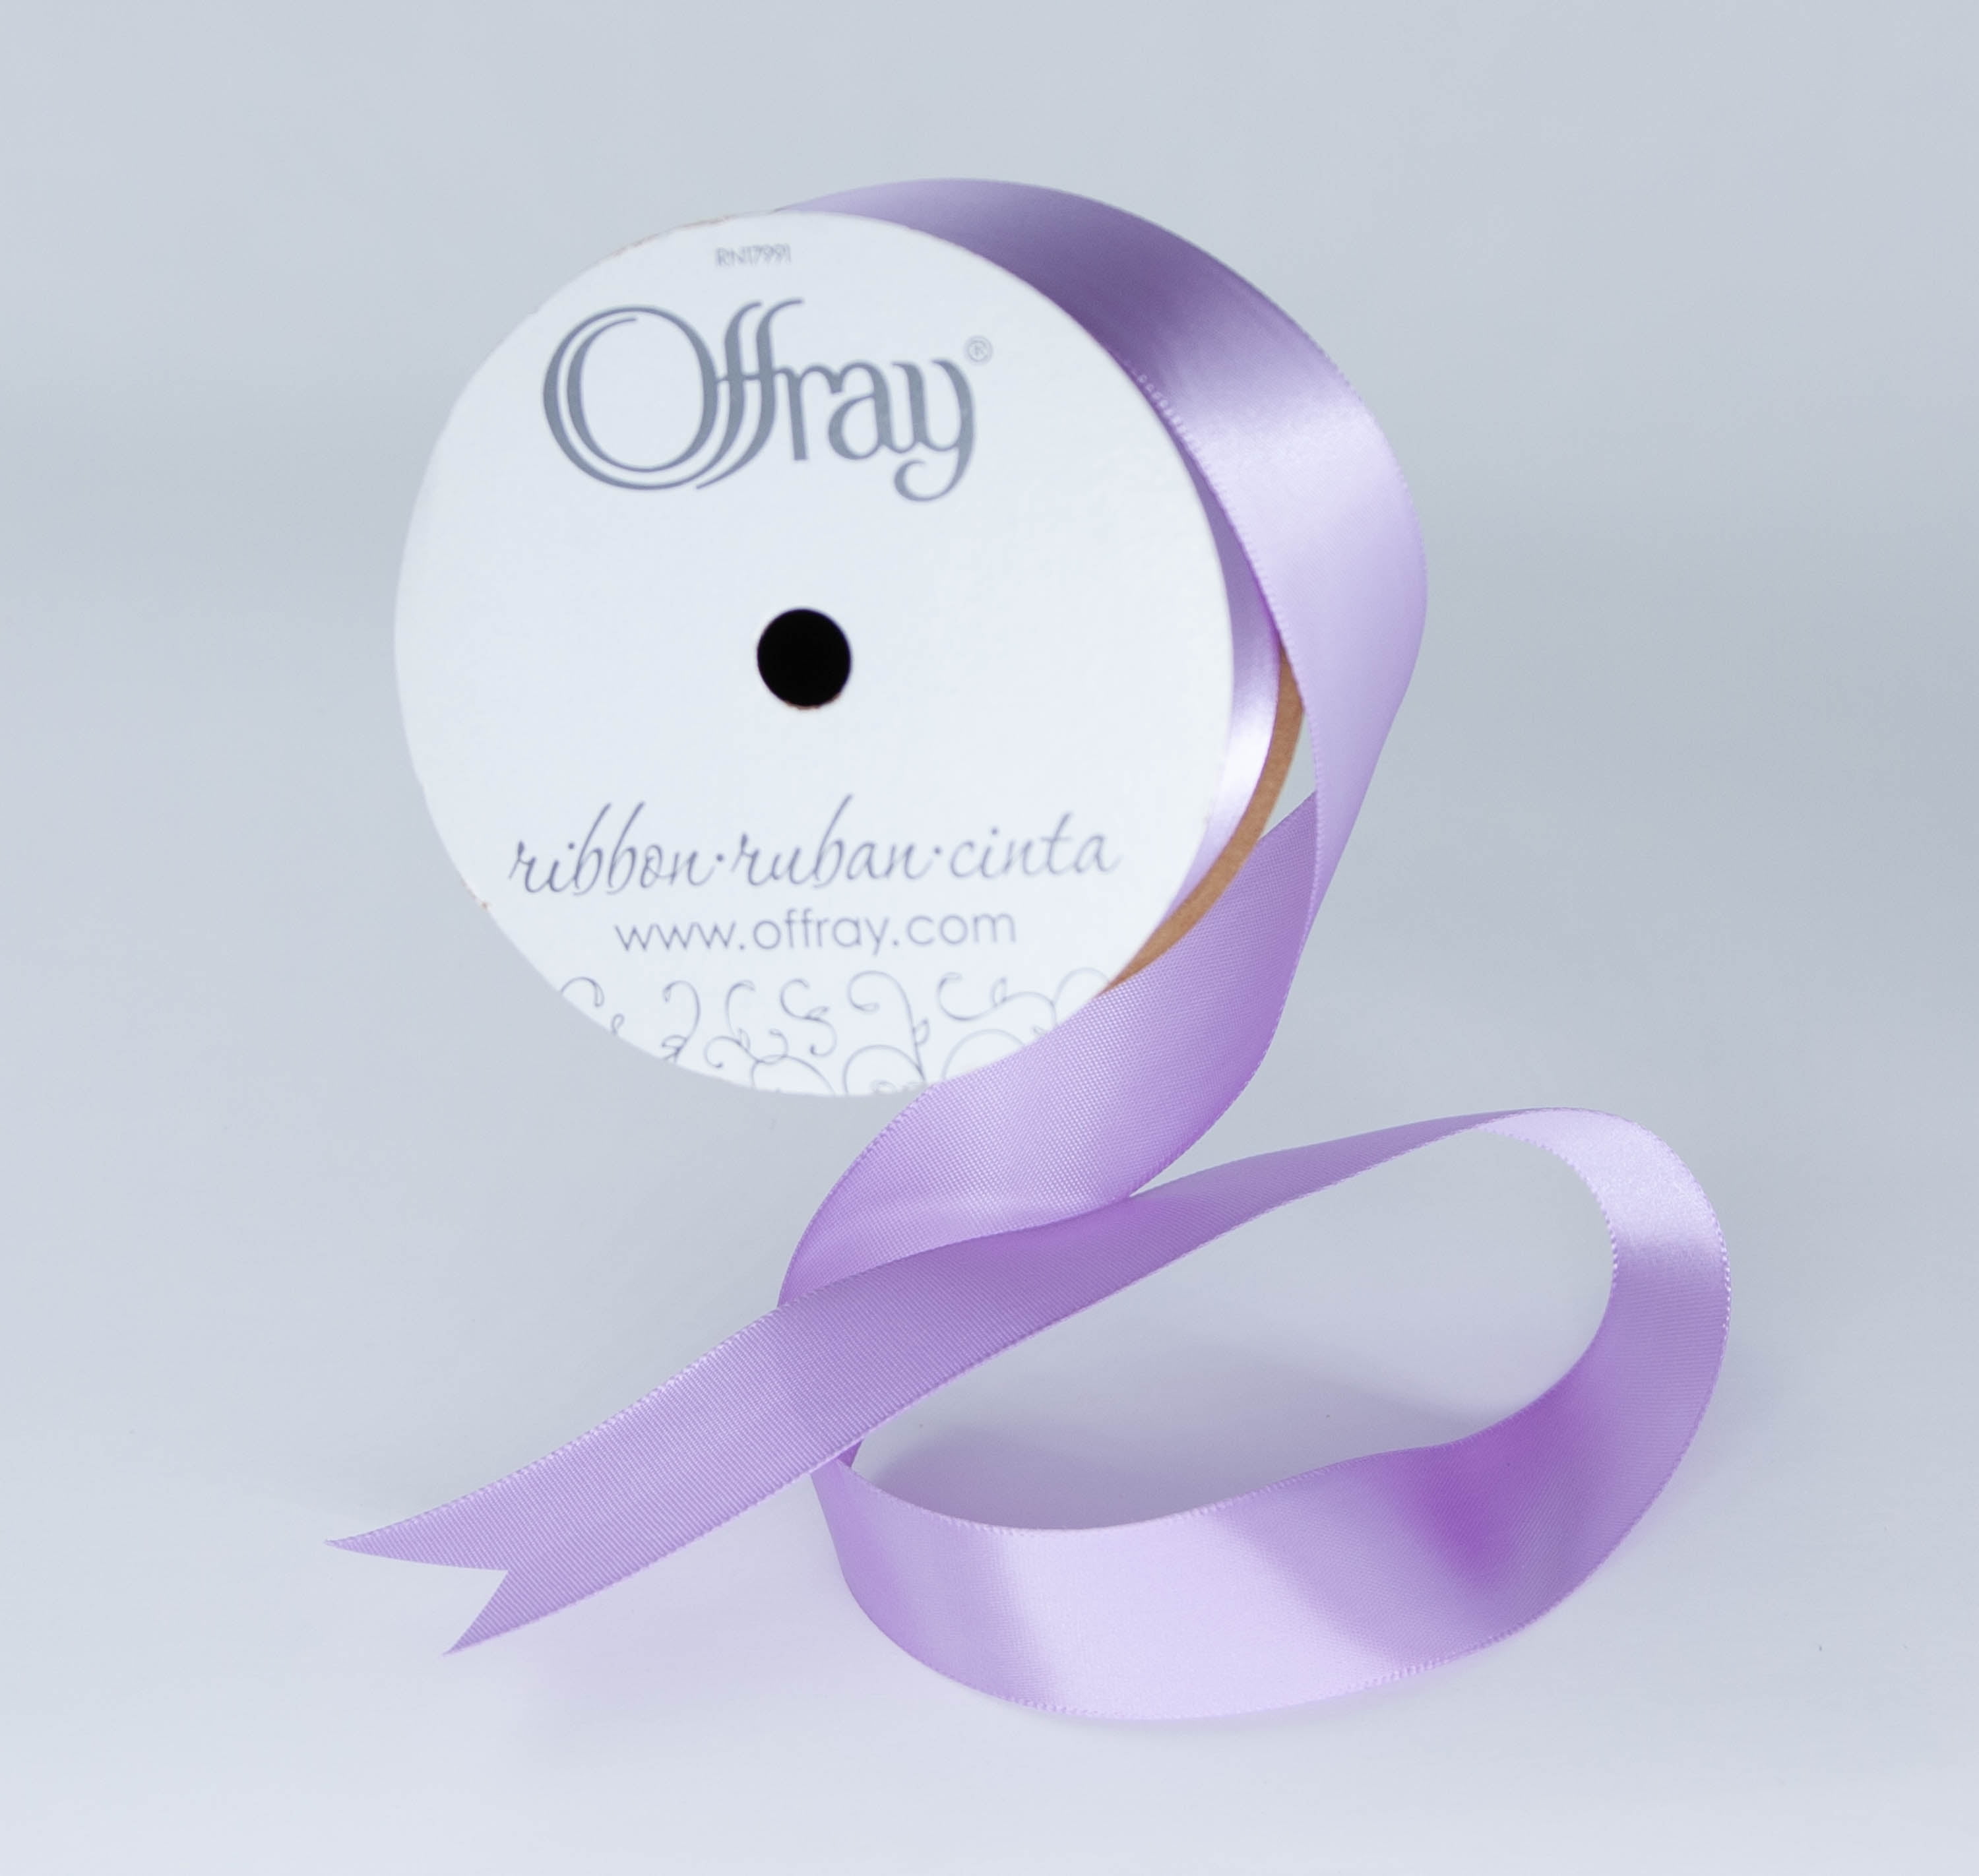 Offray 7/8x21' Double Faced Satin Solid Ribbon